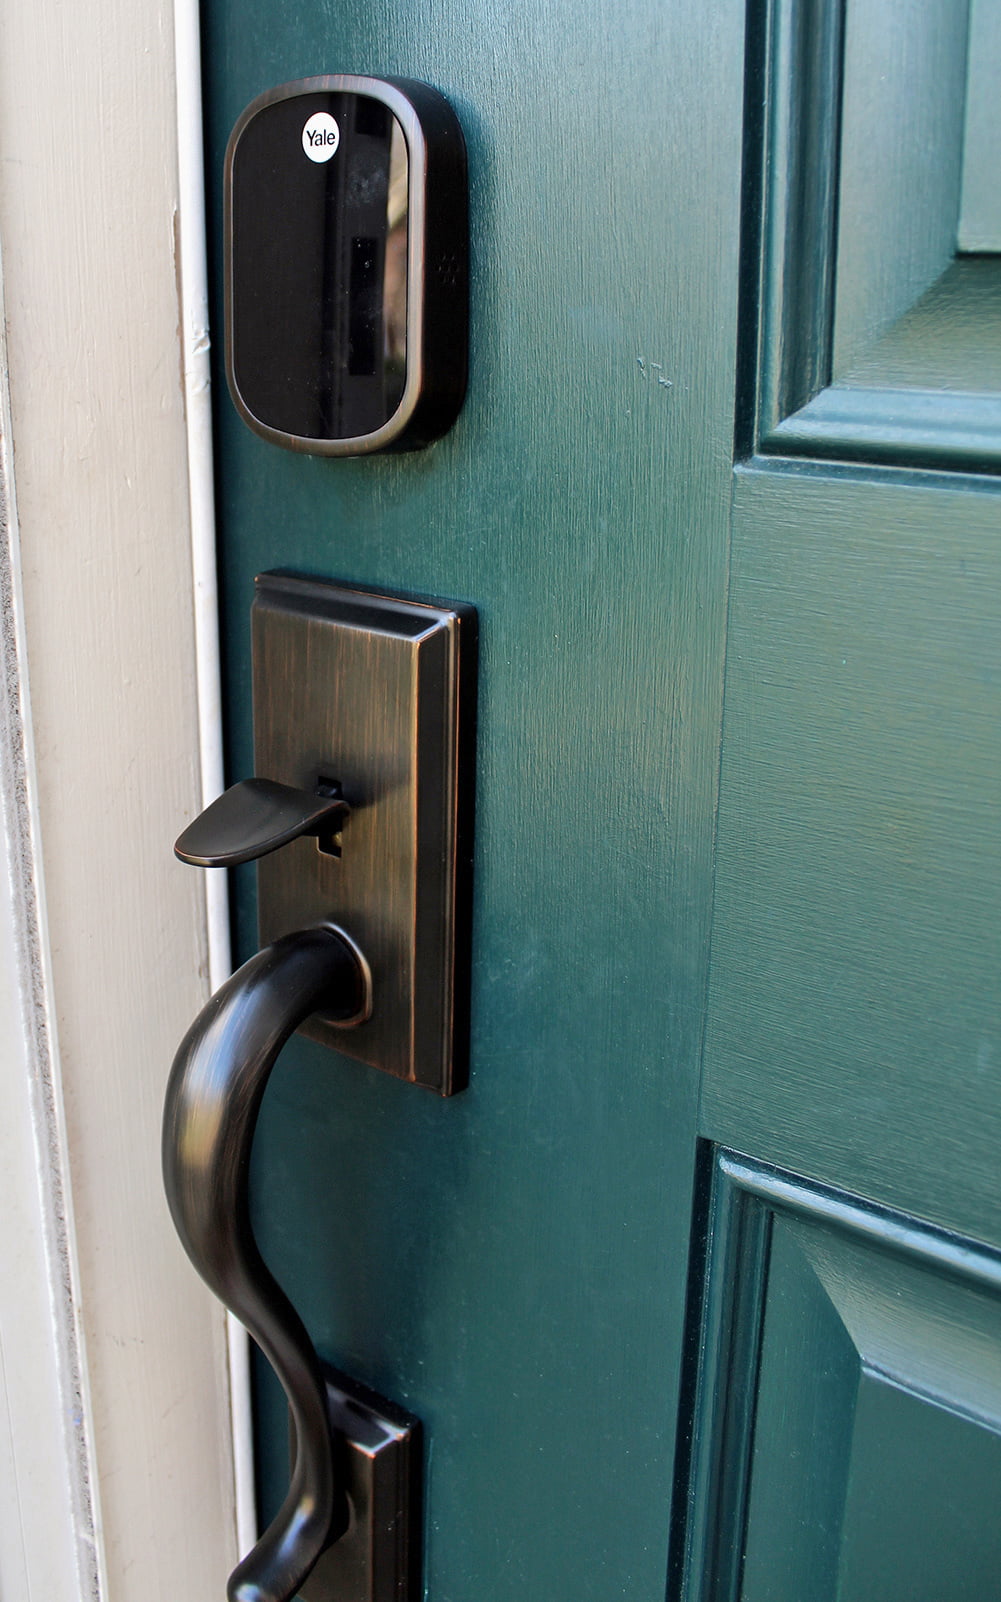 Why We Installed an Electronic Keyless Door Lock